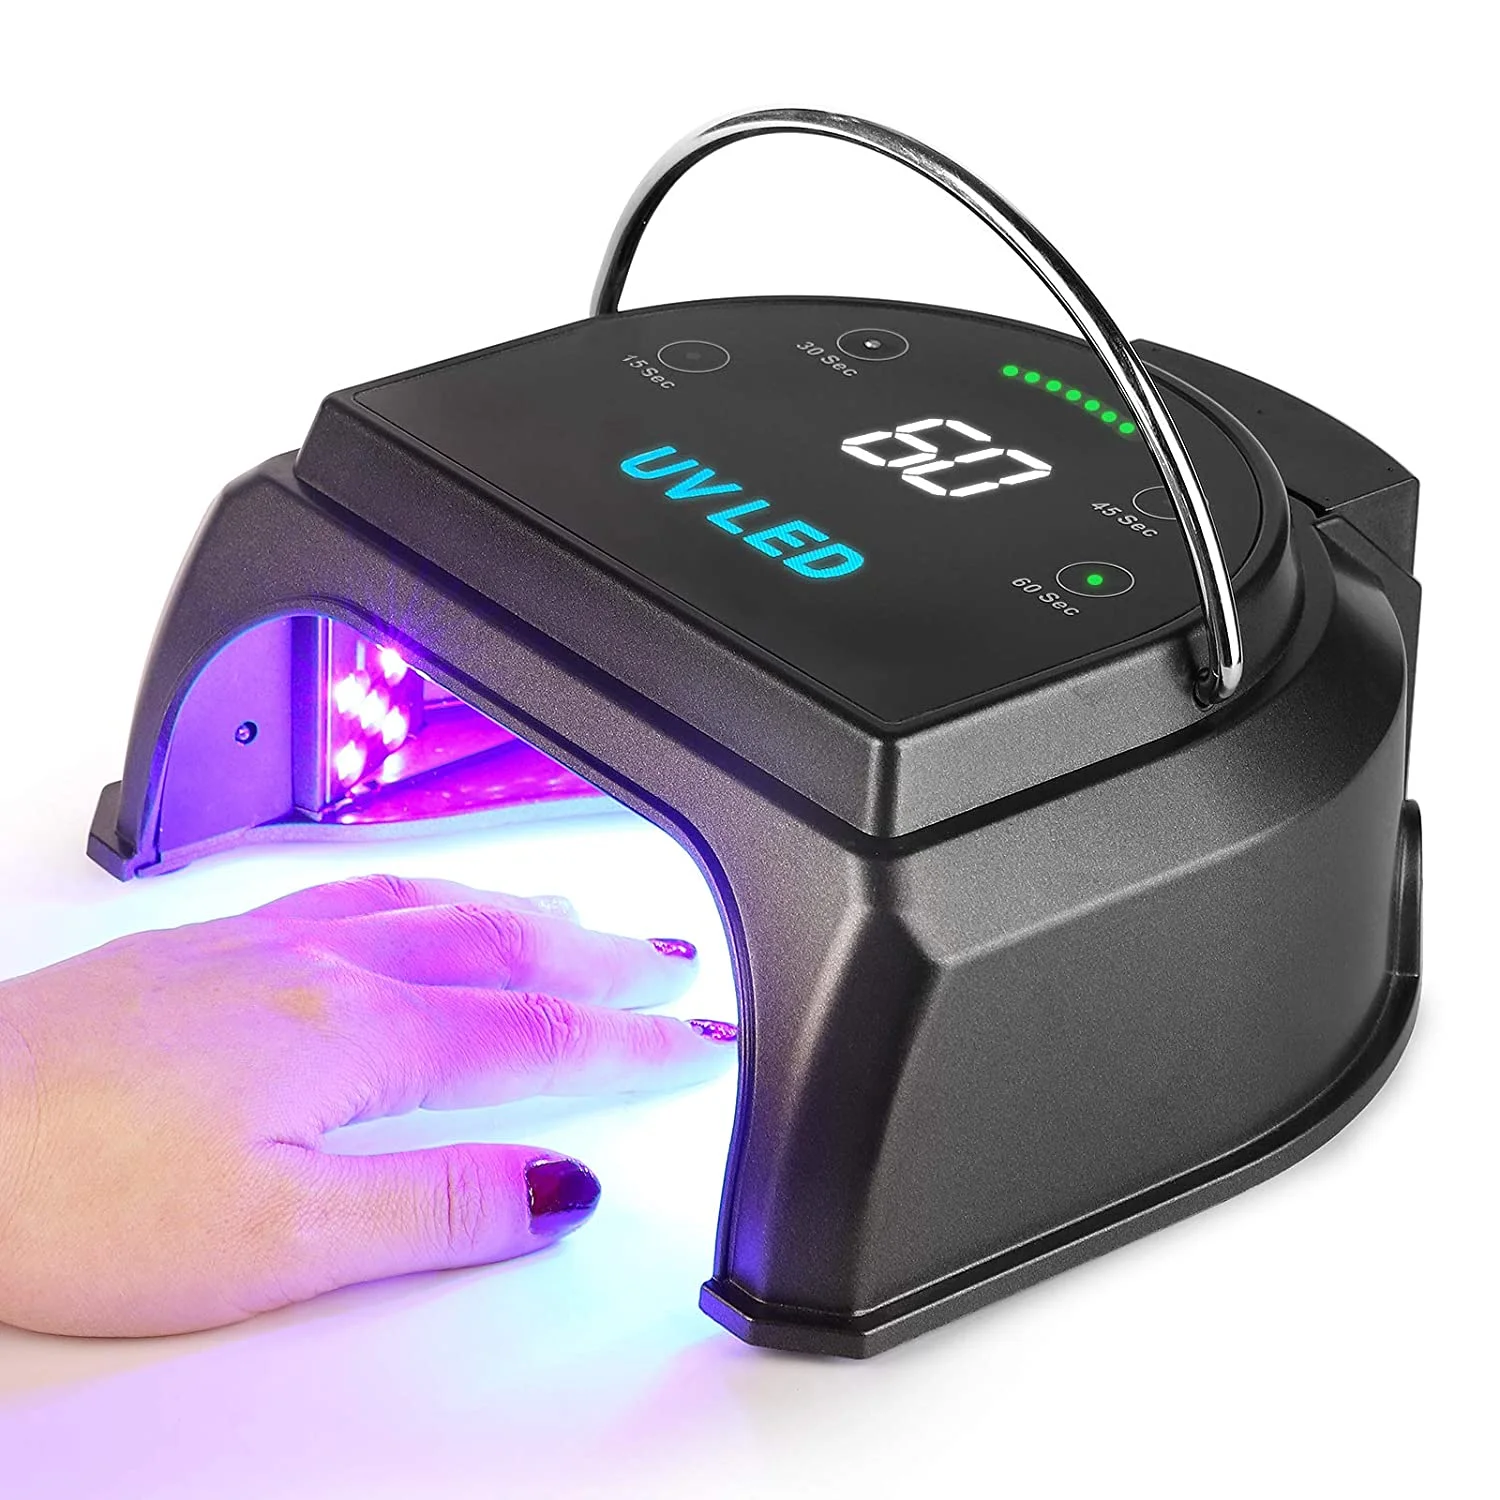 Pedicure Manicure Nail Art Tools High Power Dual Light fast curing uv nail gel lamp for Salon Beauty